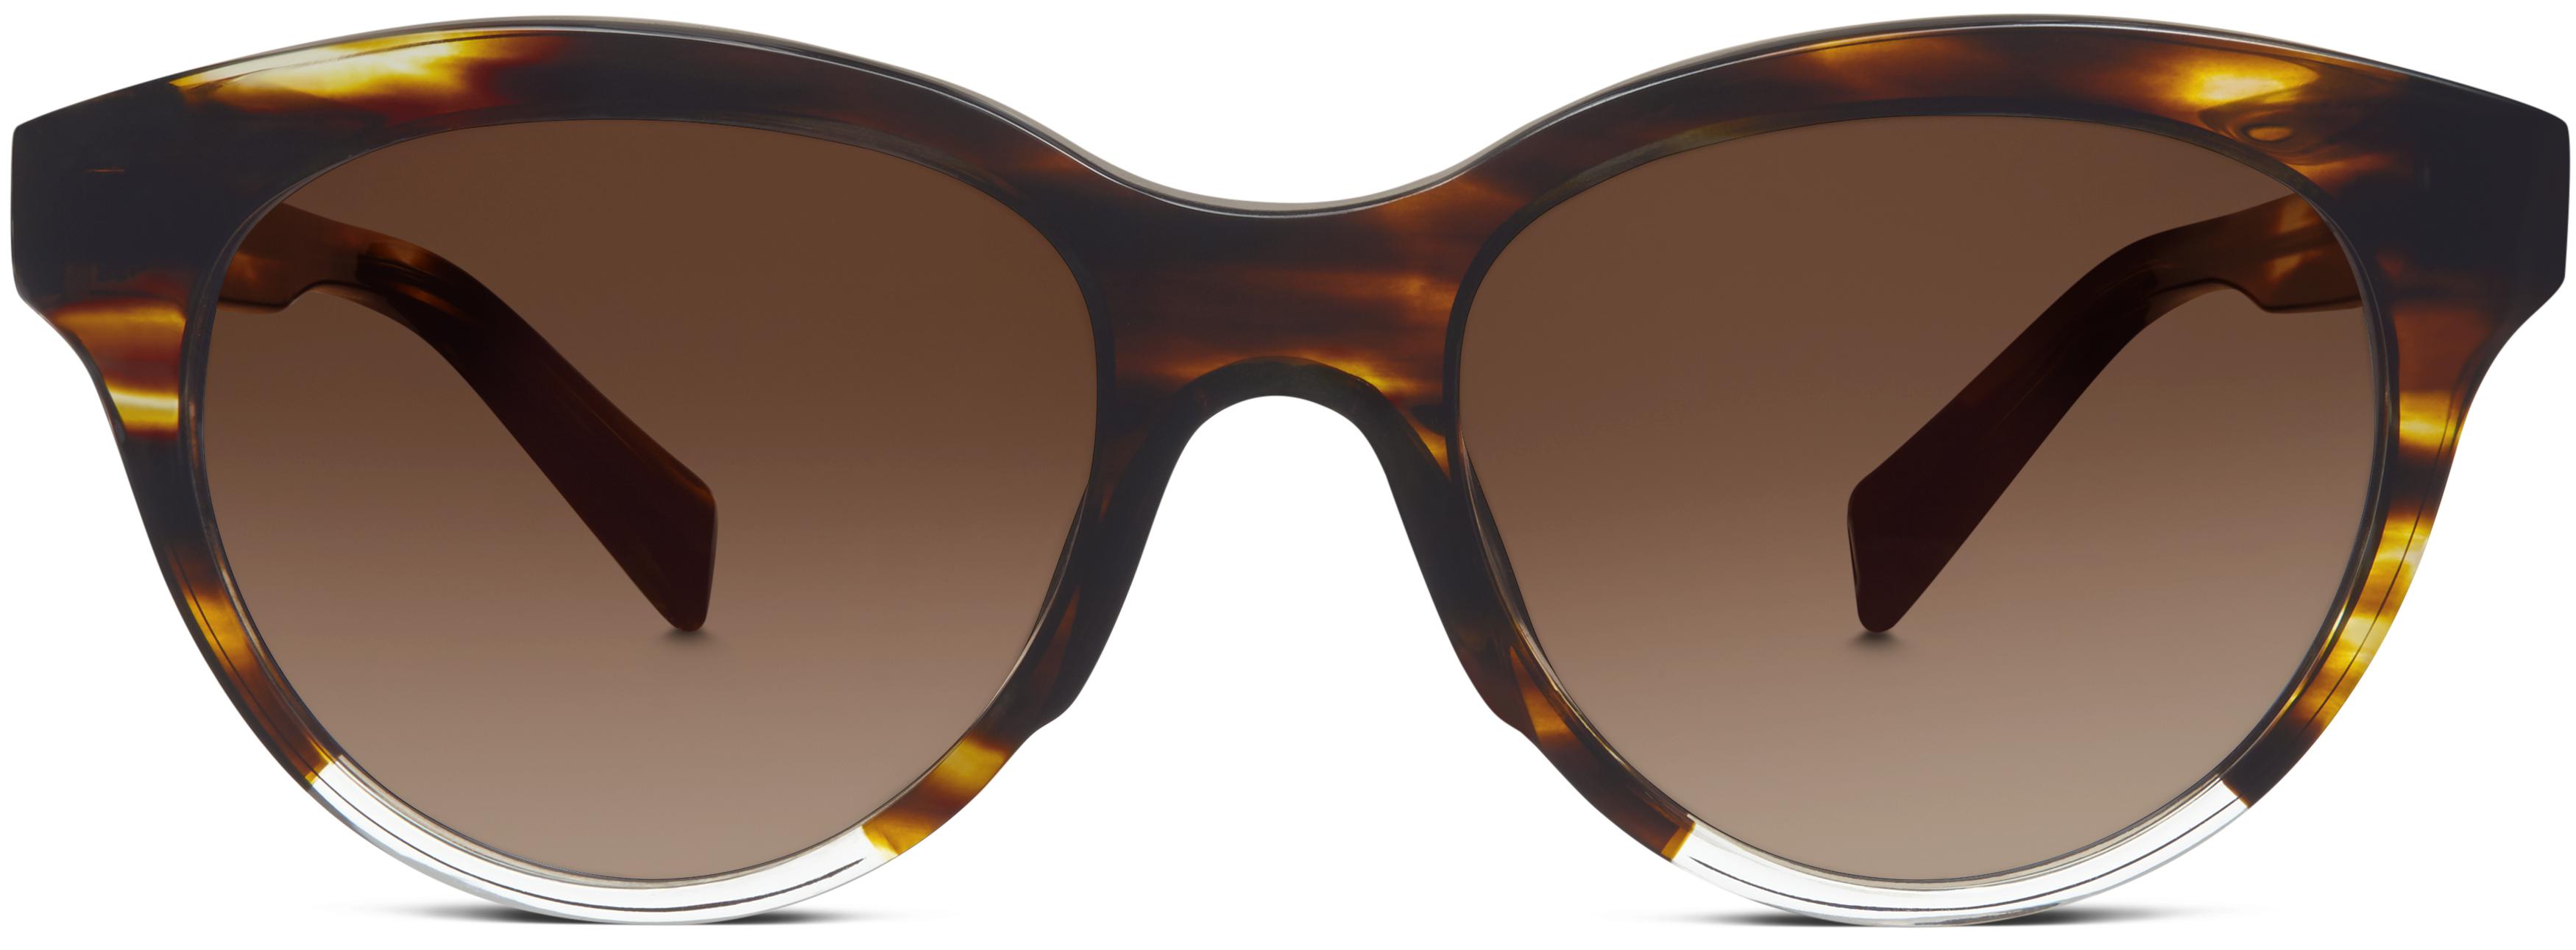 Piper Sunglasses in Striped Sassafras and Crystal | Warby Parker